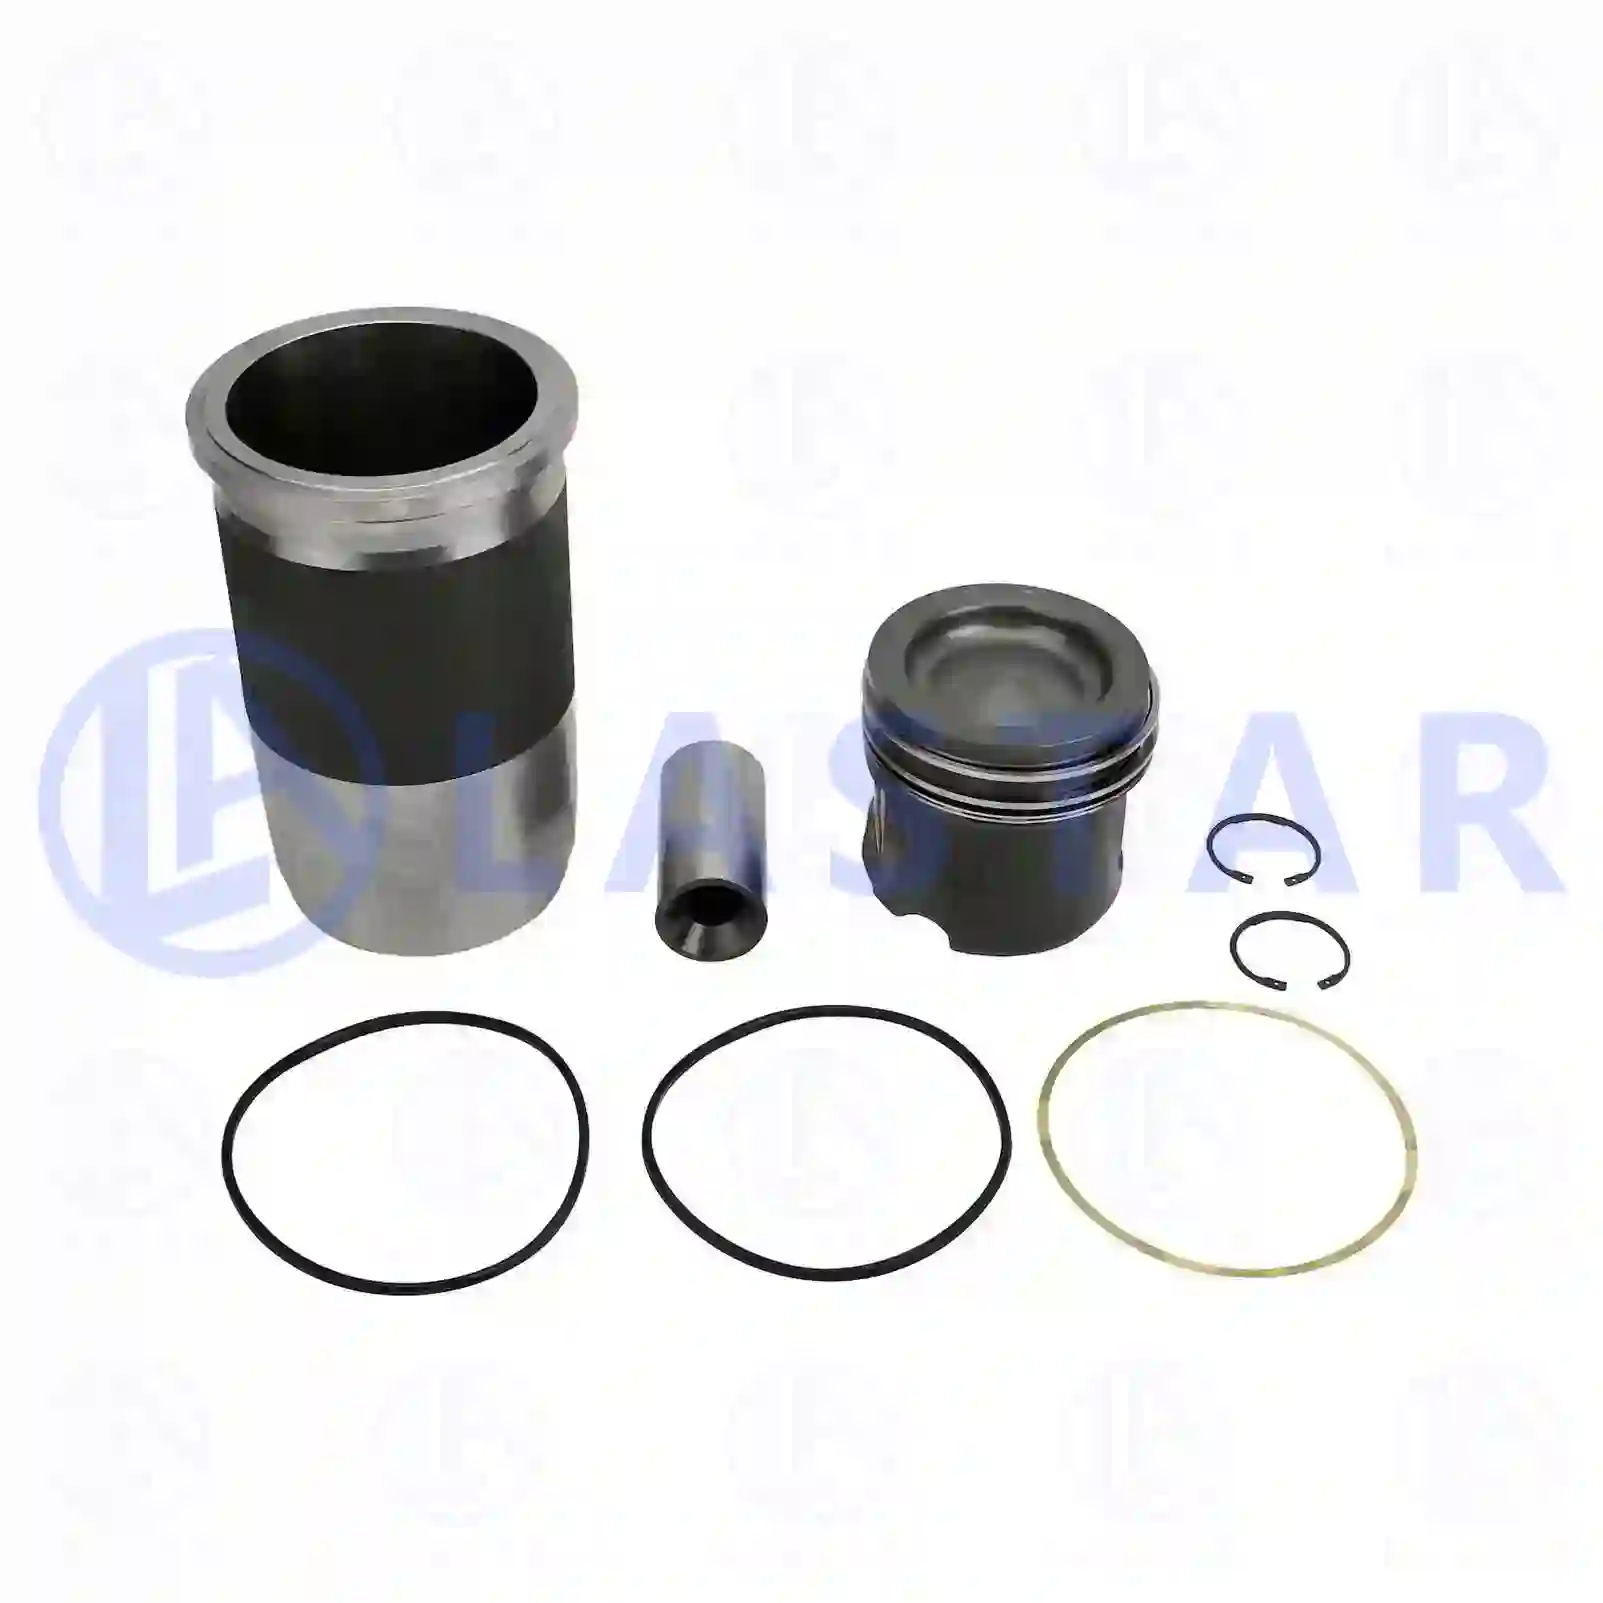 Piston with liner, 77702613, 5410102737, 5410301237, 5410302737 ||  77702613 Lastar Spare Part | Truck Spare Parts, Auotomotive Spare Parts Piston with liner, 77702613, 5410102737, 5410301237, 5410302737 ||  77702613 Lastar Spare Part | Truck Spare Parts, Auotomotive Spare Parts